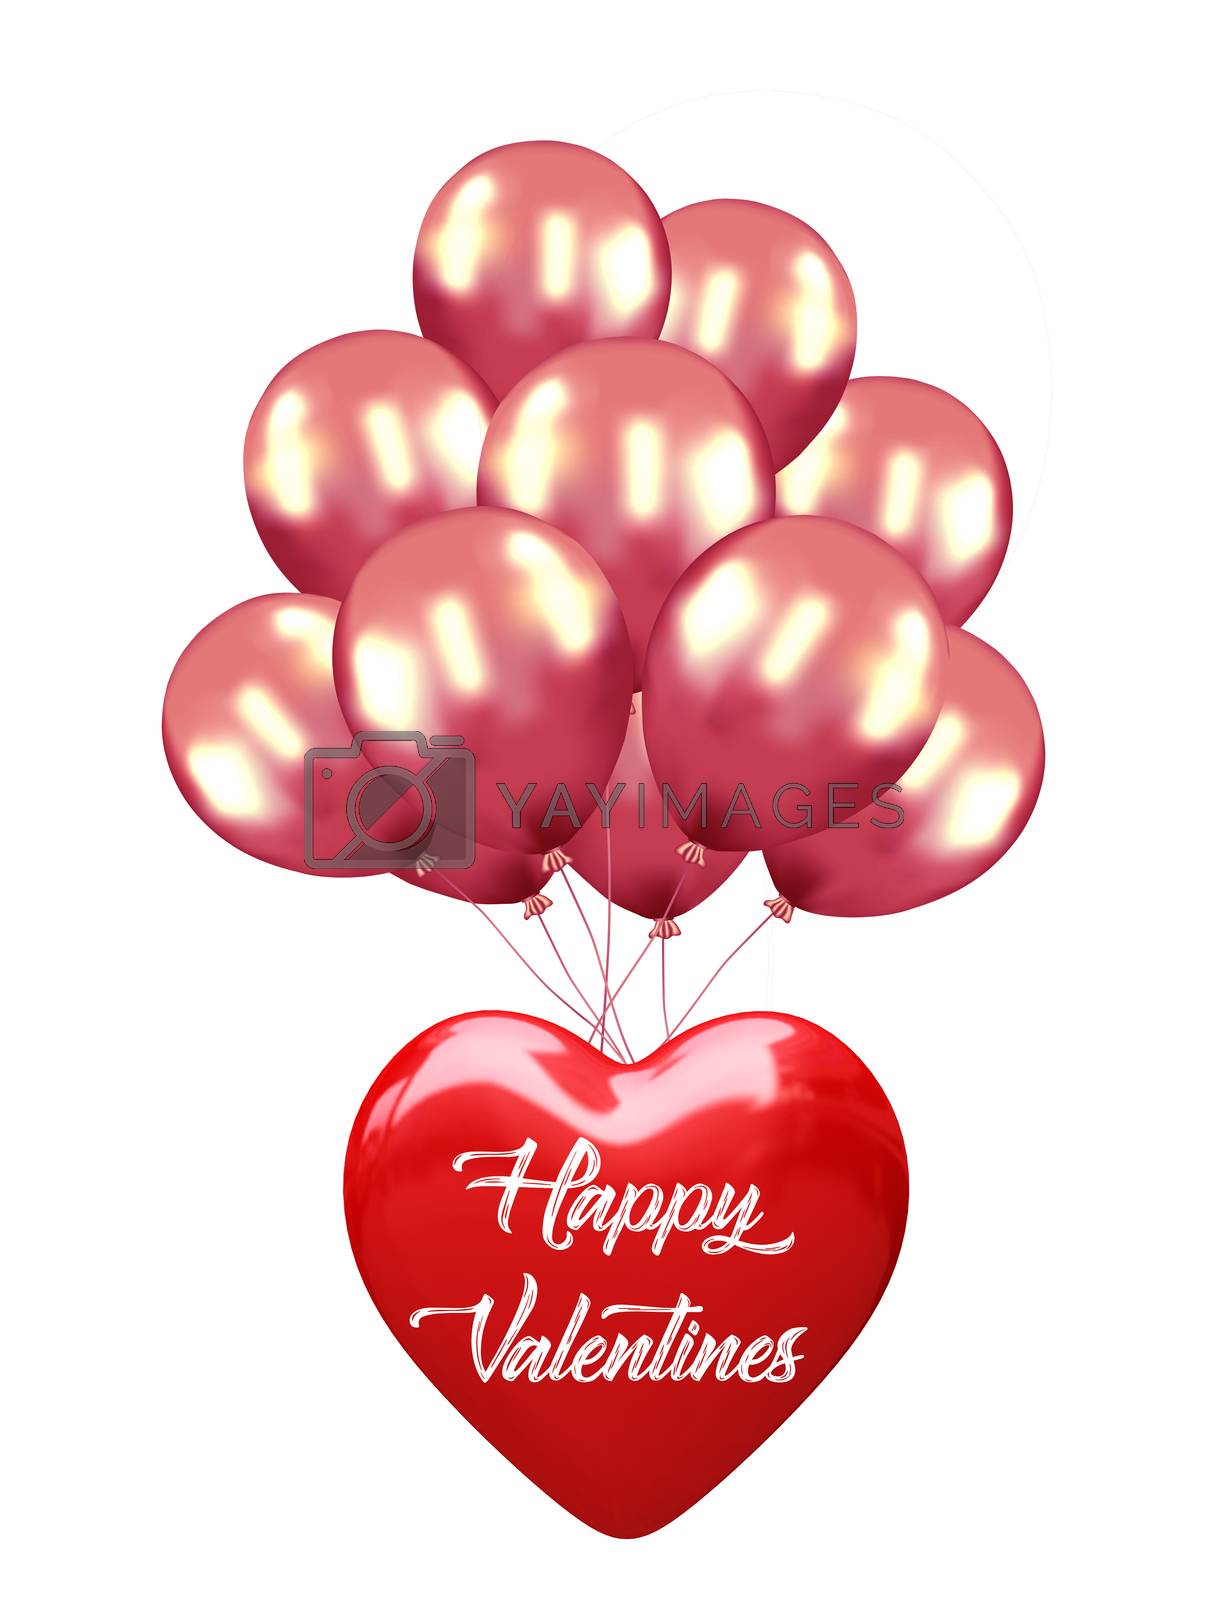 Royalty free image of Love Baloon isolated on white, Ballon heart : red valentine love concept, Valentines day. ısolated. by hakankacar2014